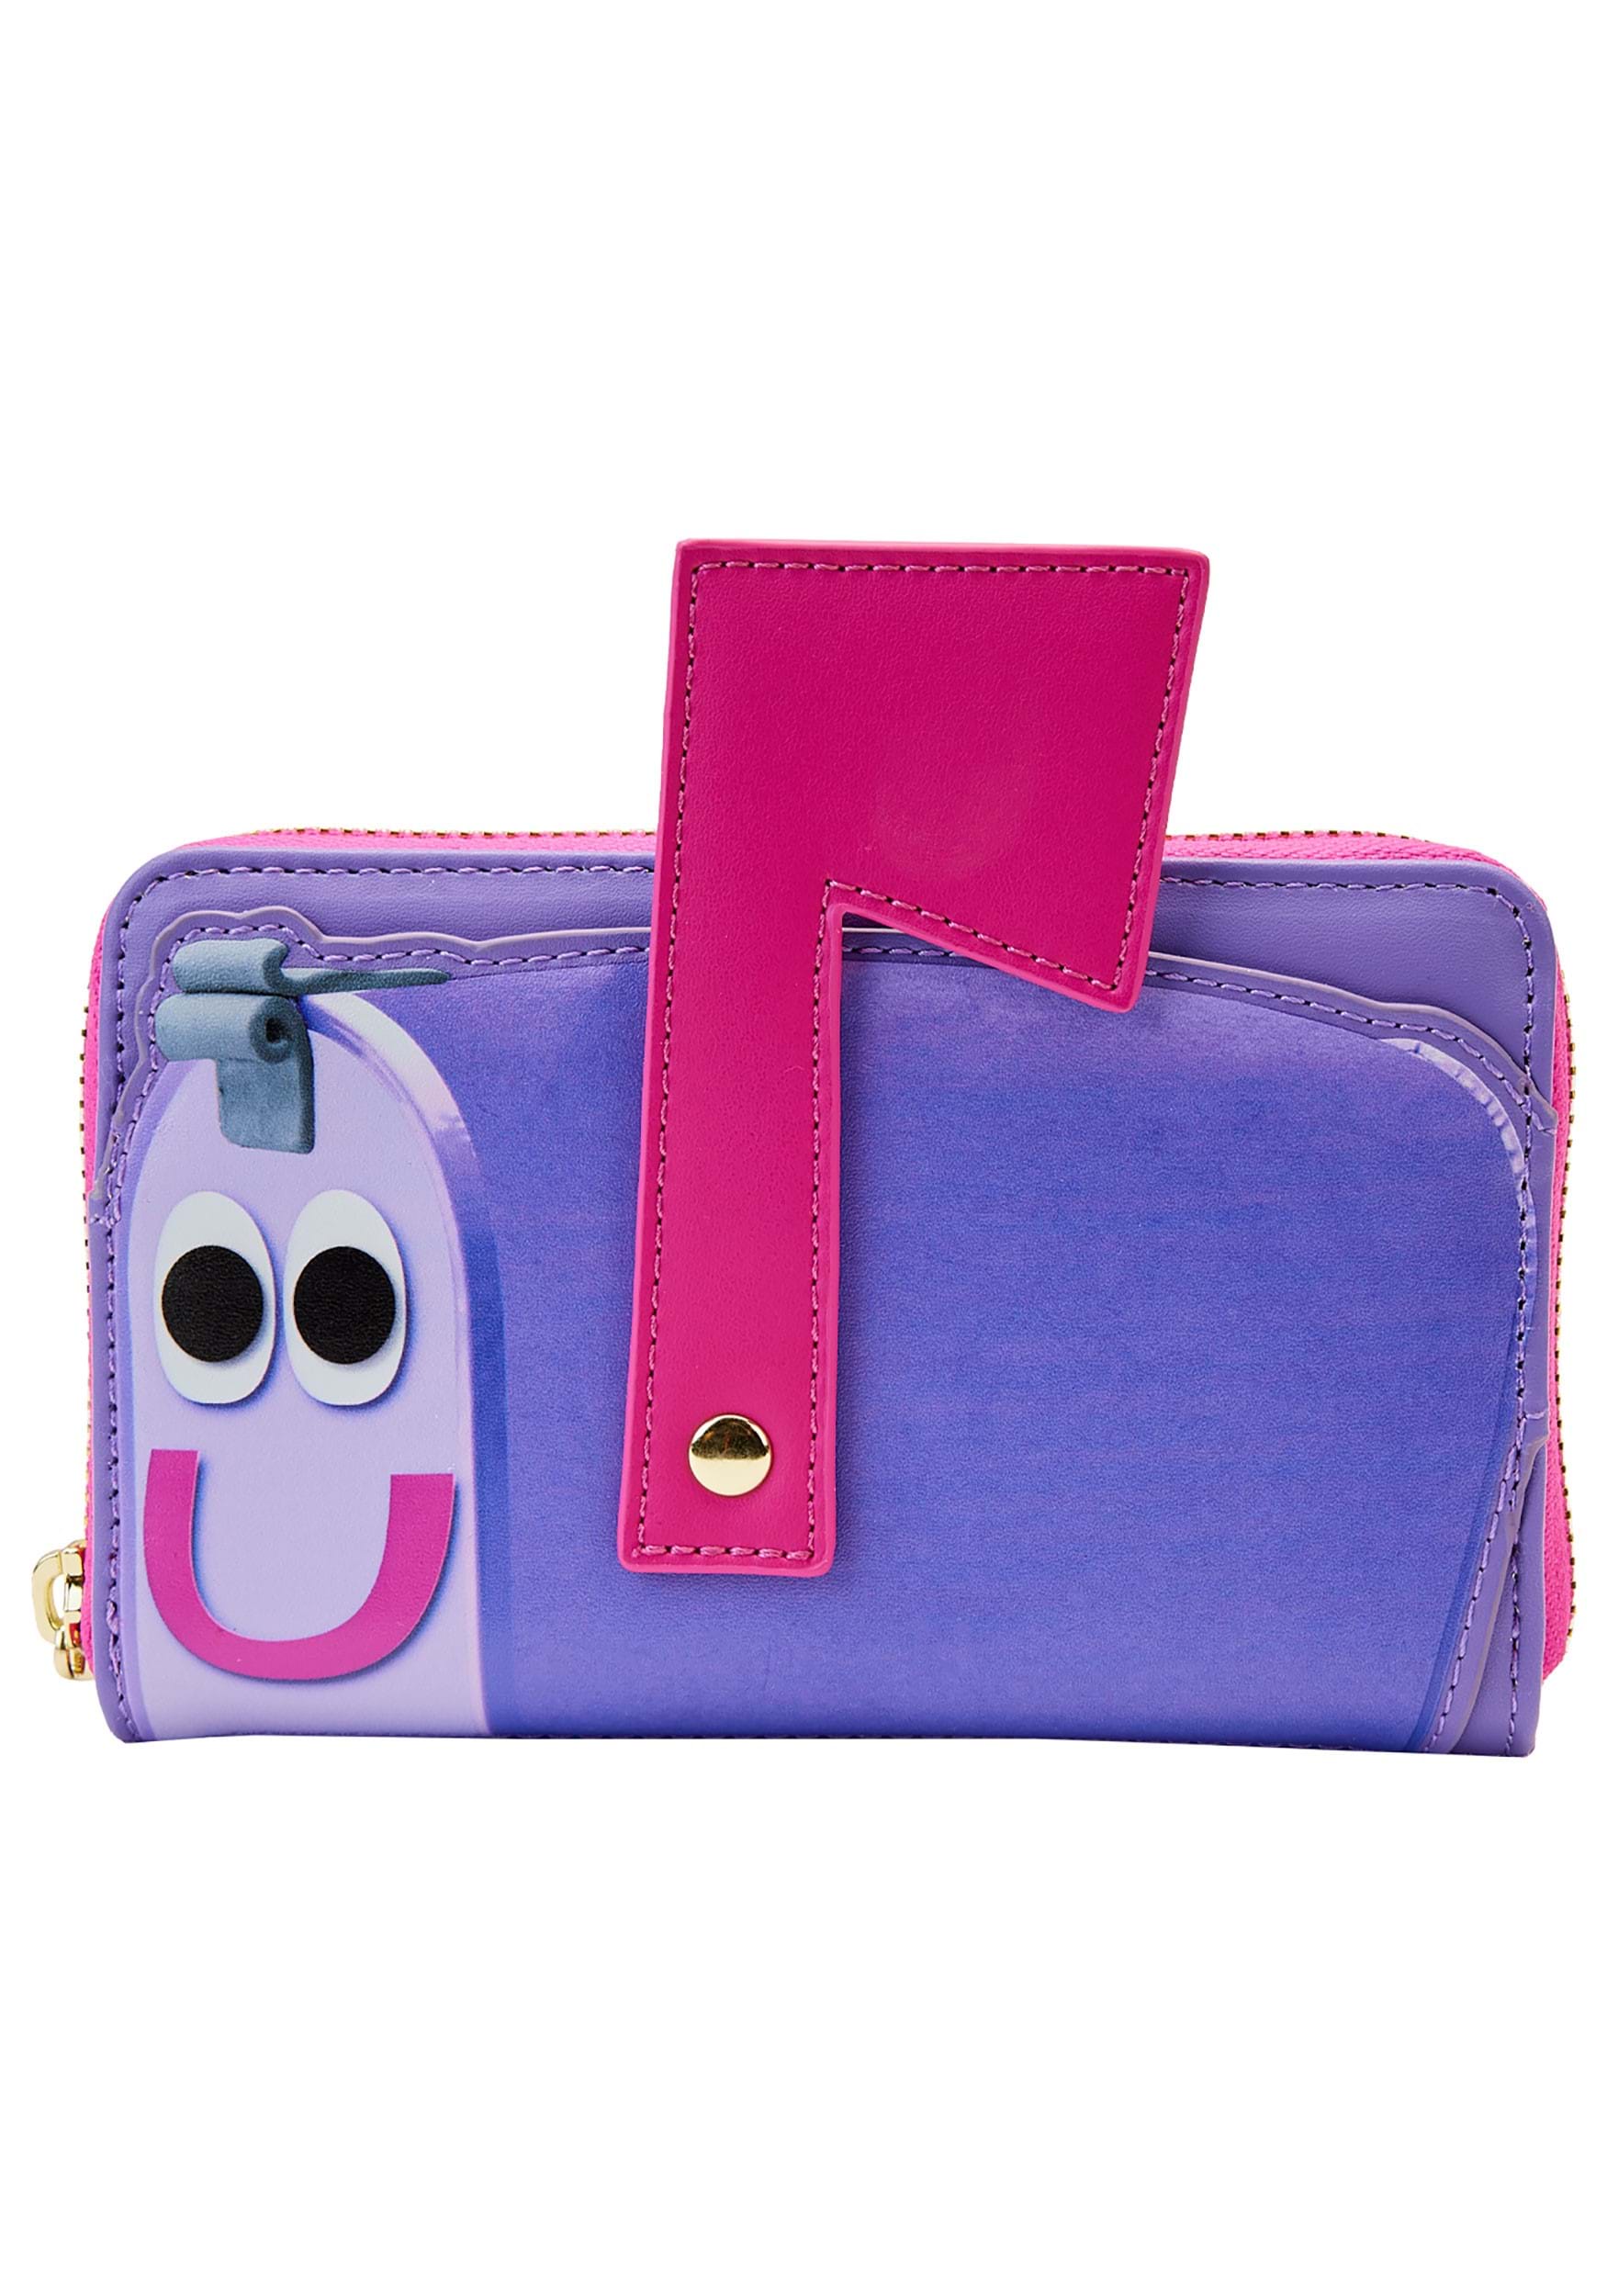 Nickelodeon Blues Clues Mail Time Loungefly Wallet